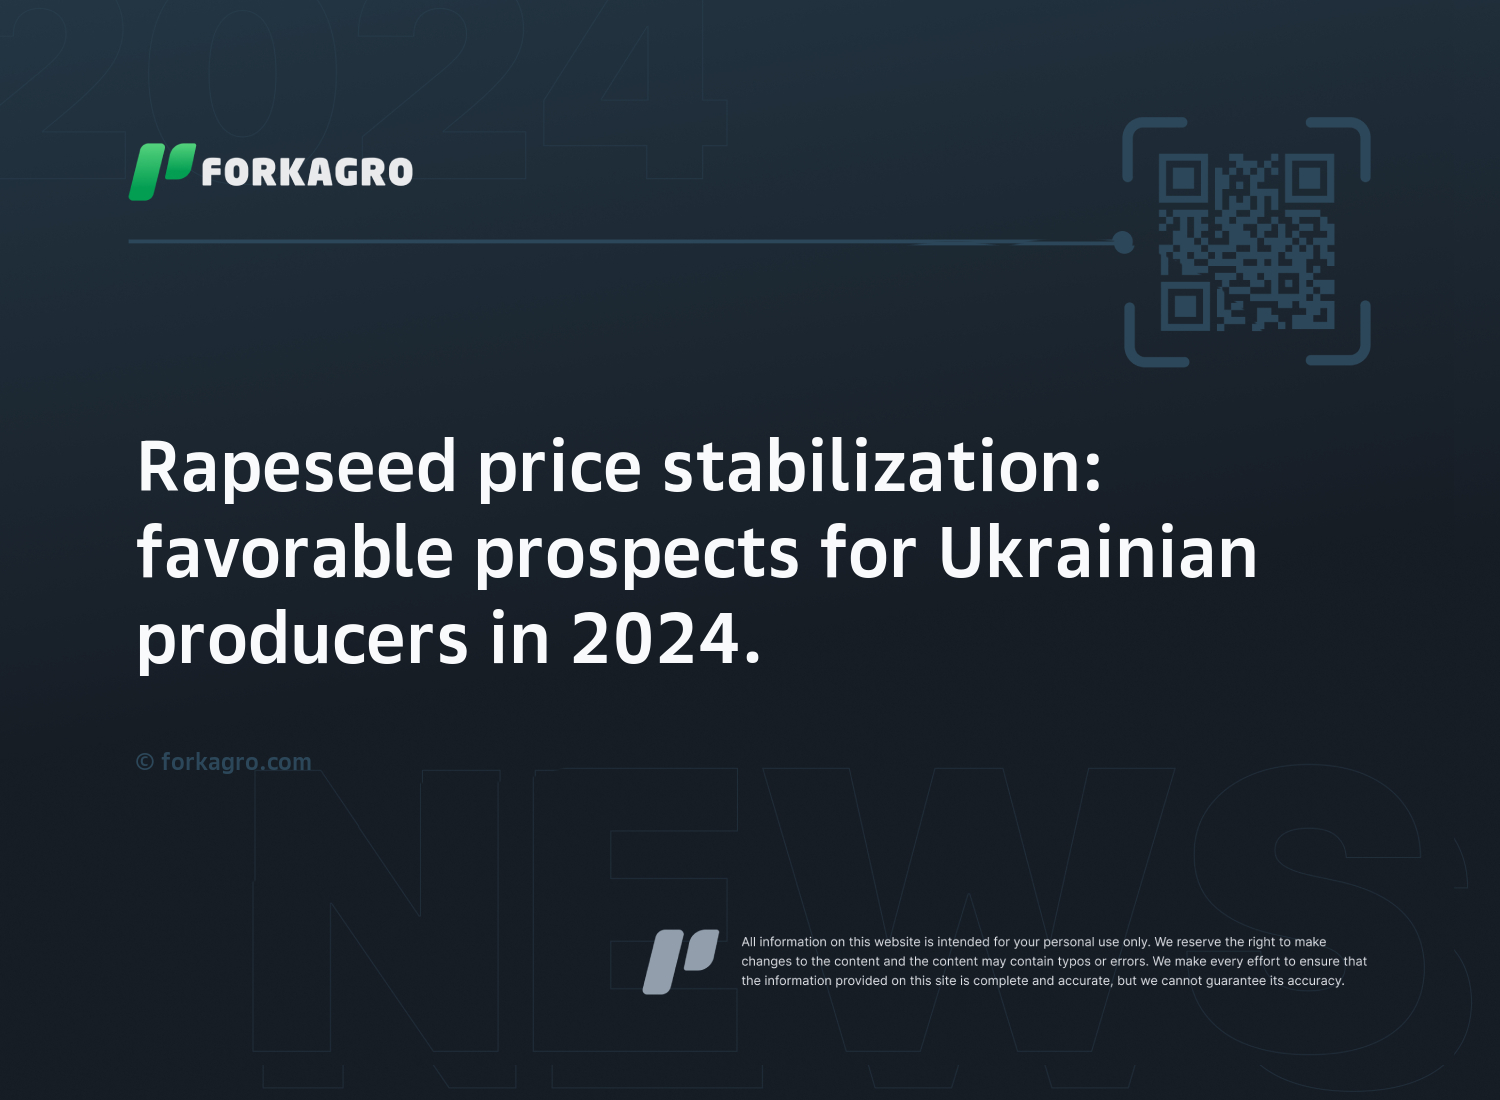 Rapeseed price stabilization: favorable prospects for Ukrainian producers in 2024.